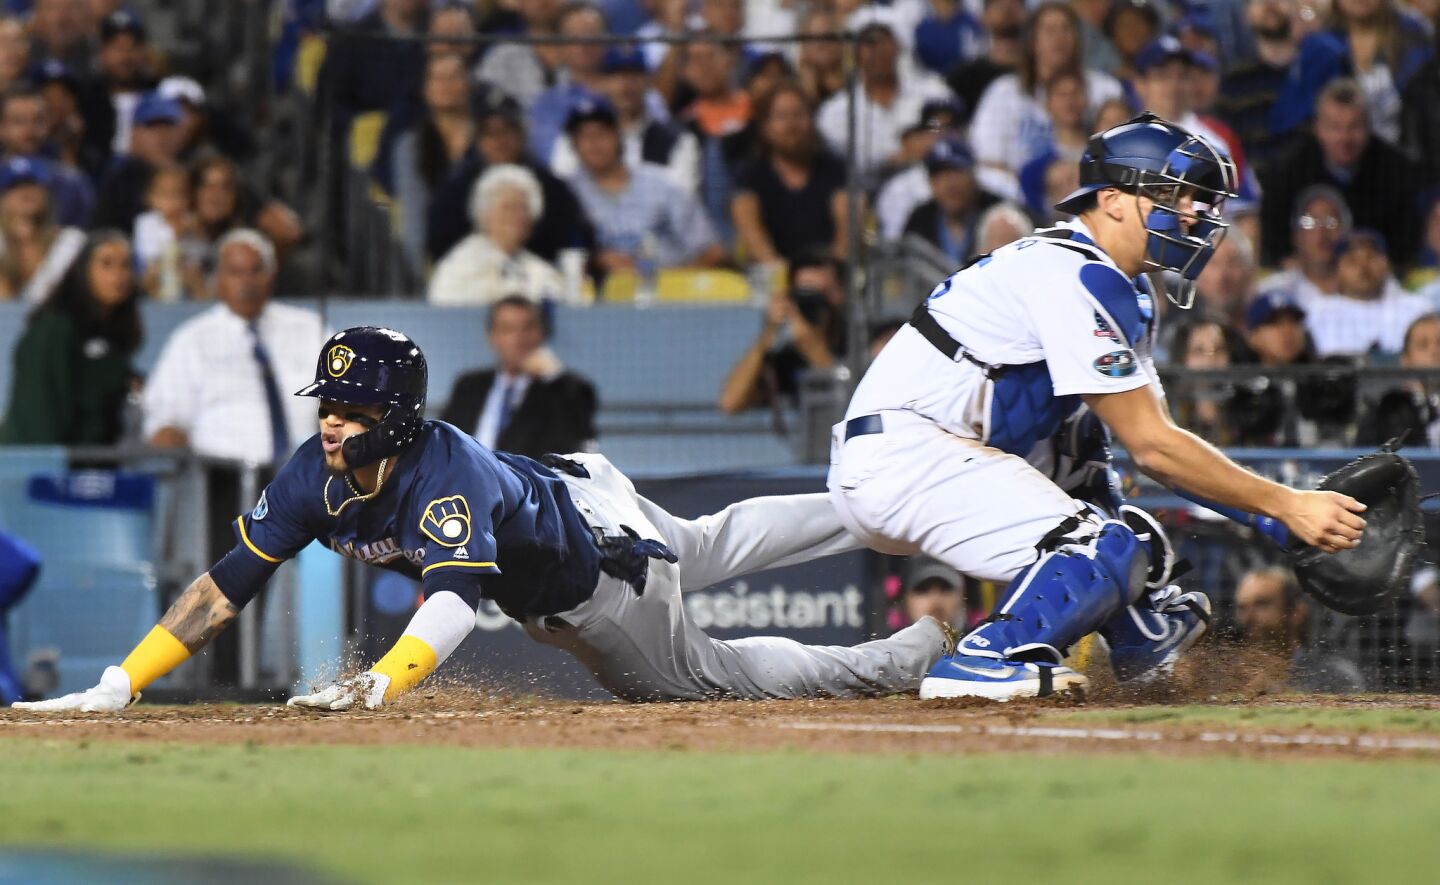 Brewers Orlando Arcia scores a run in fornt of Dodgers catcher Austin Barnes on a double by Domingo Santana in the 5th inning.